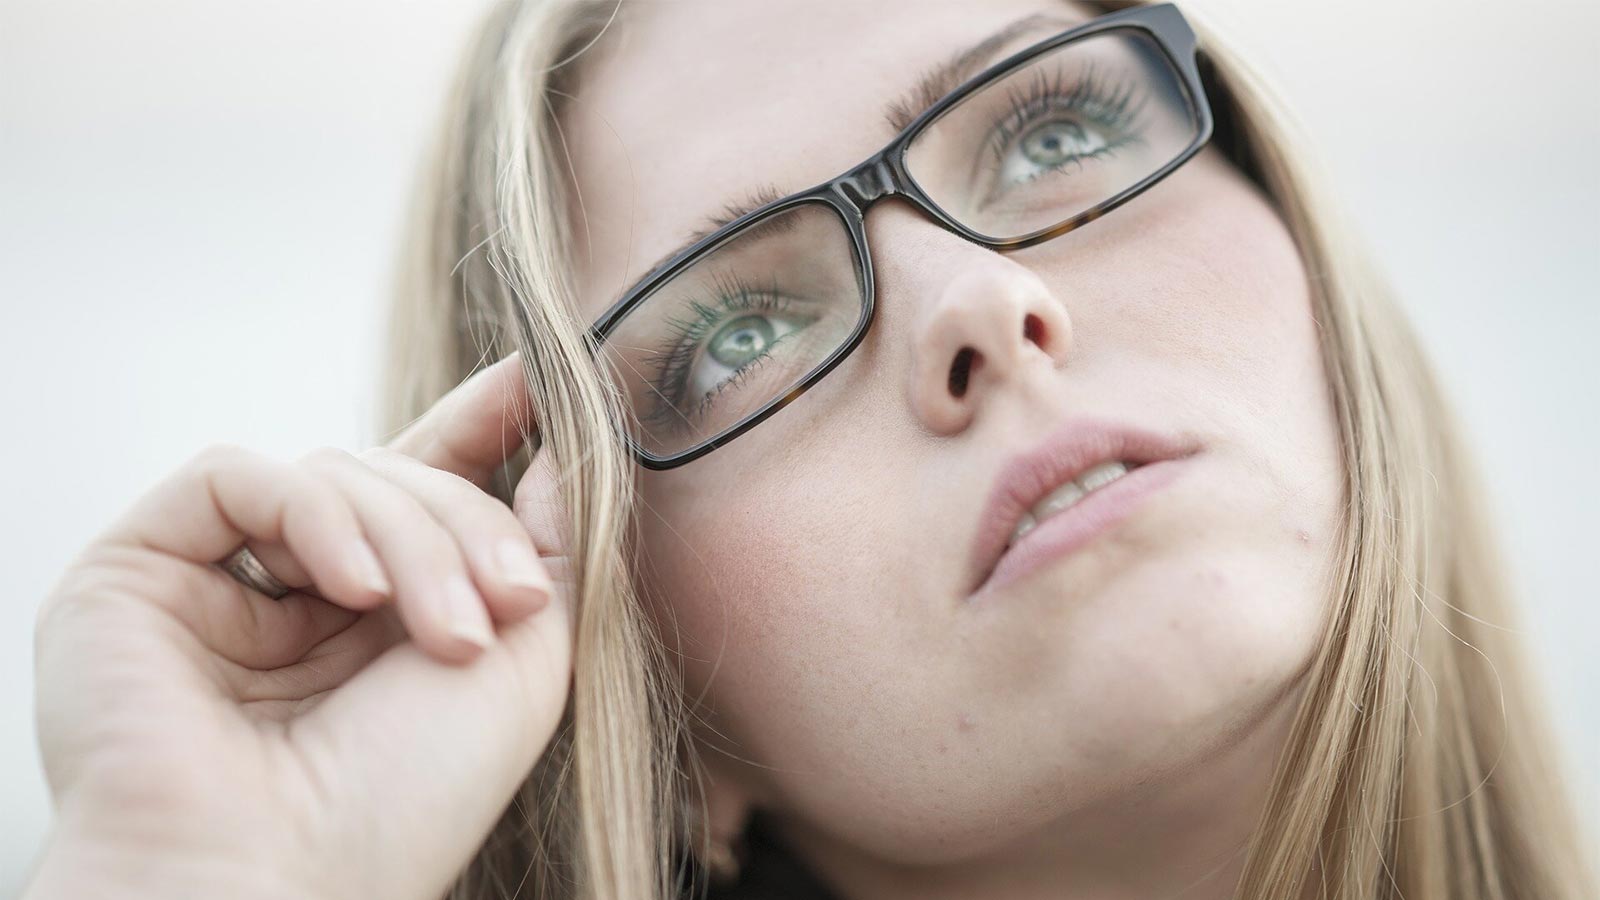 Does wearing glasses protect you from coronavirus?